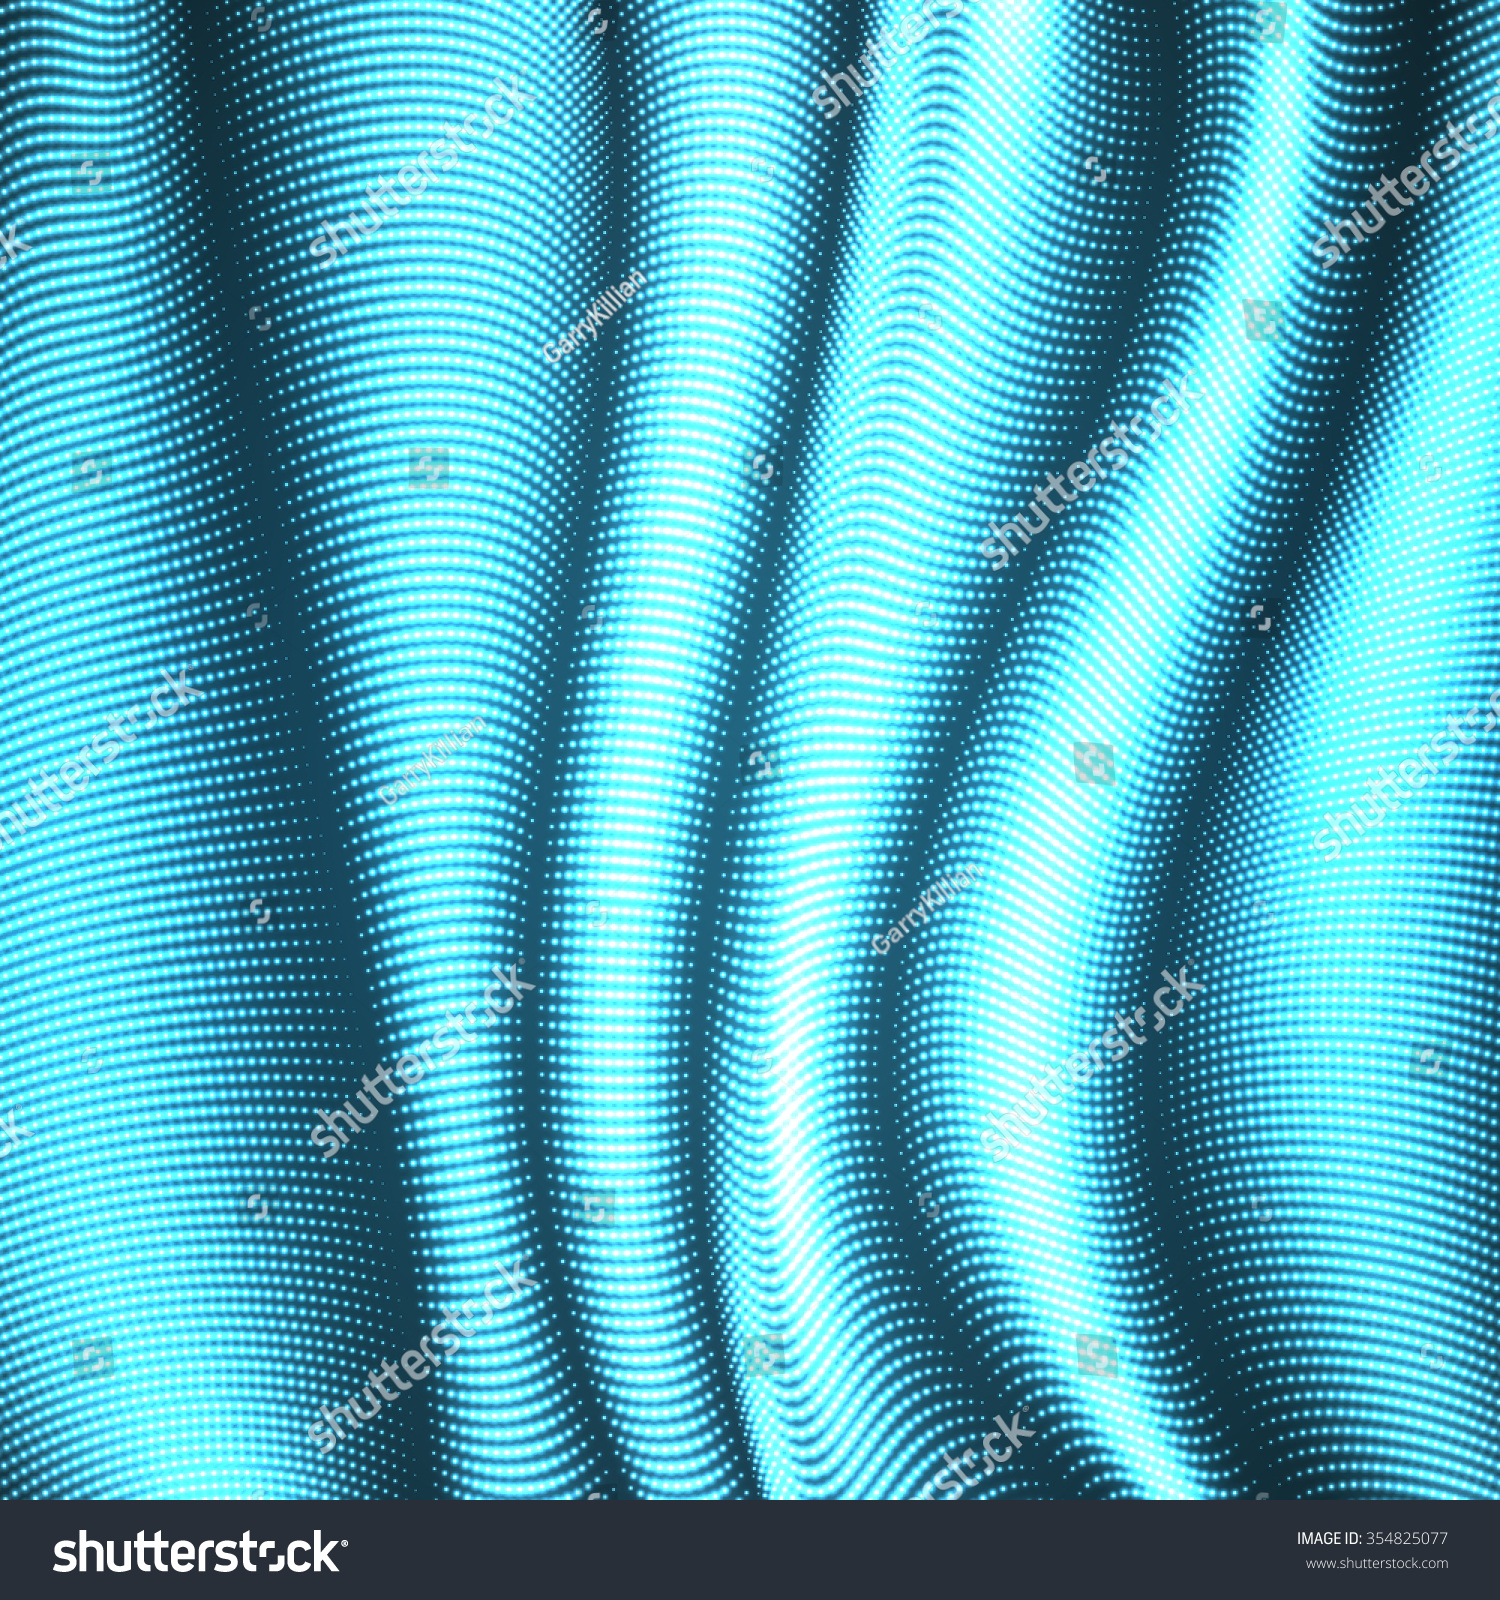 Vector Warped Dotted Lines Background Flexible Stock Vector ...